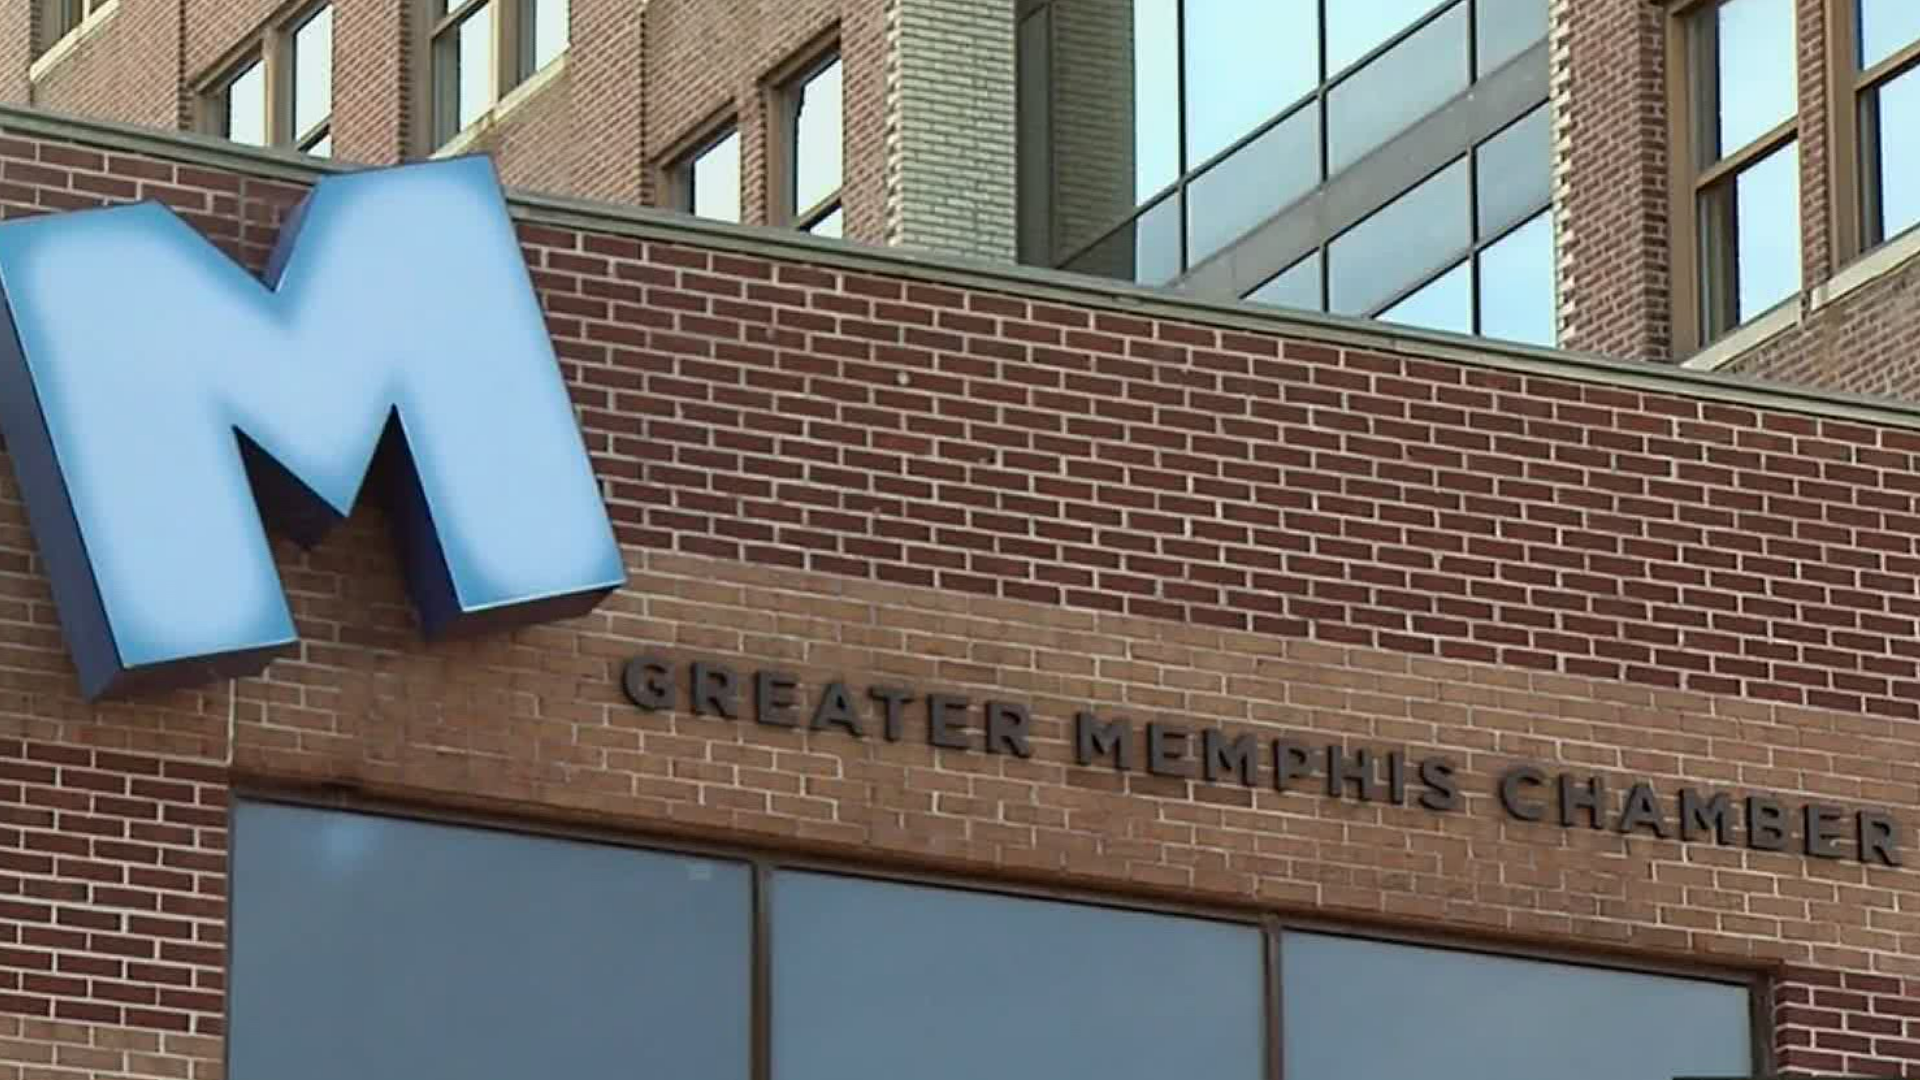 When it comes to racial equality, the Greater Memphis Chamber said it's time to move from protests to real action.